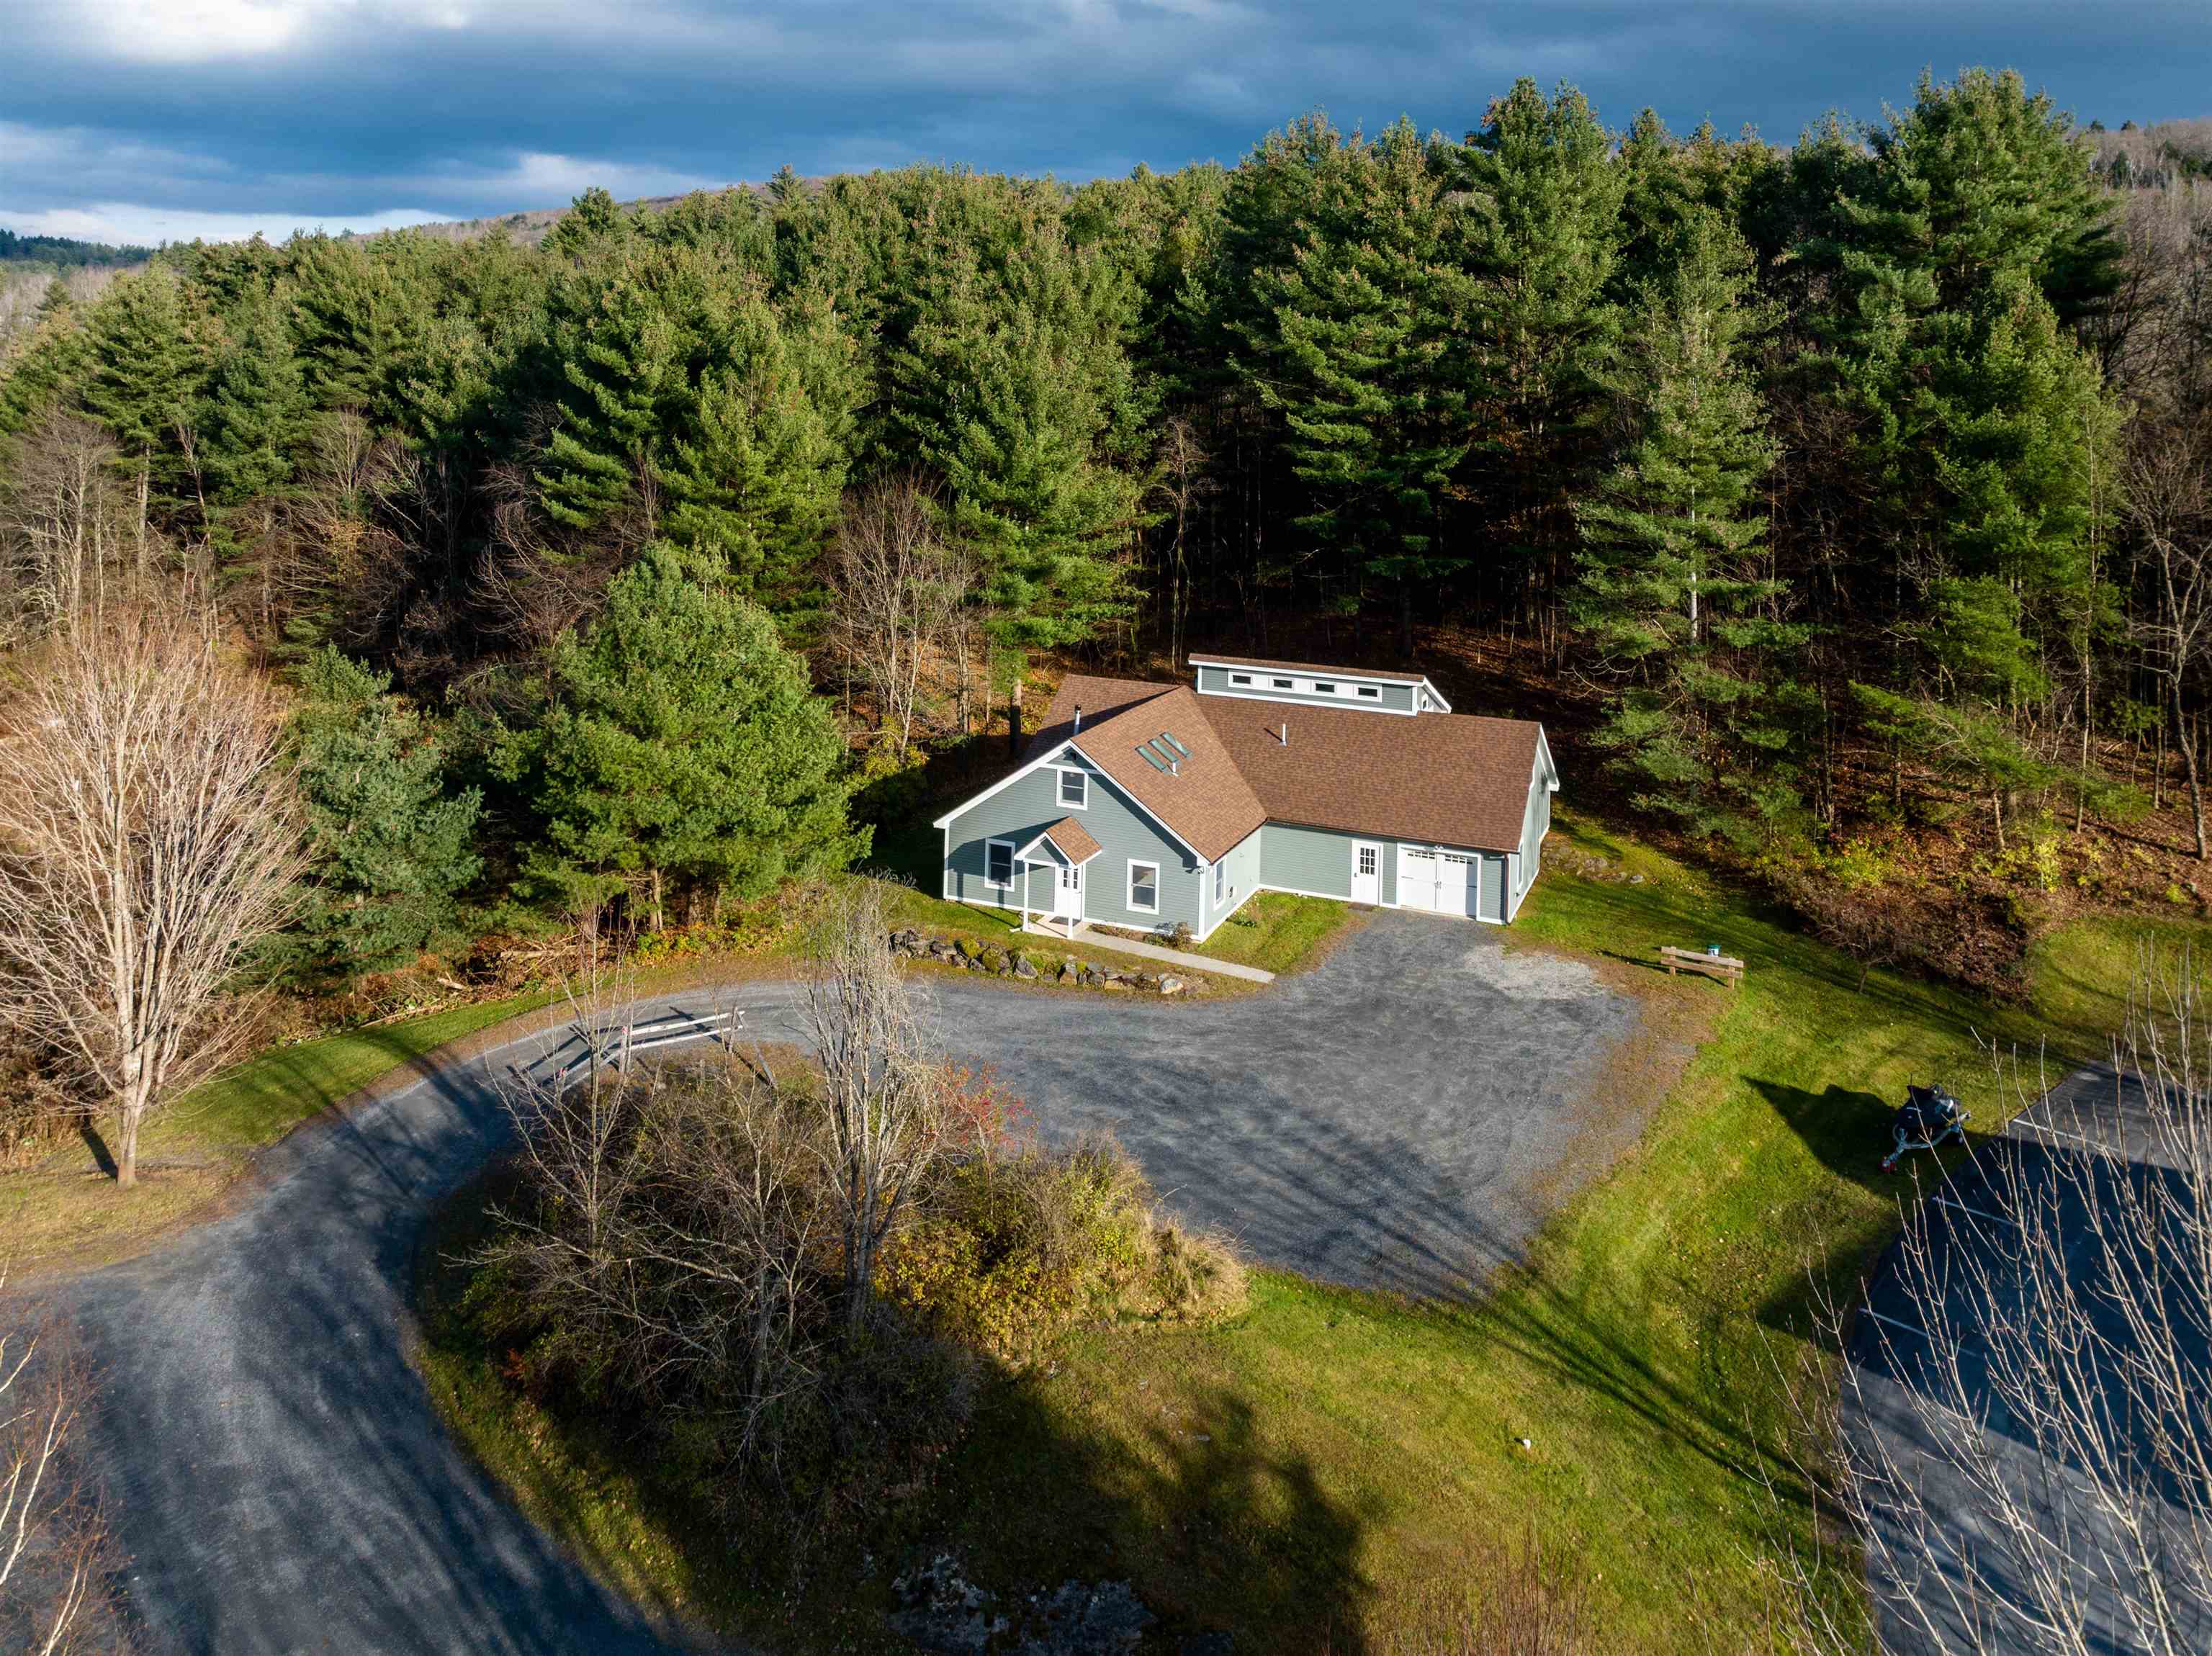 68 Central Drive, Stowe, VT 